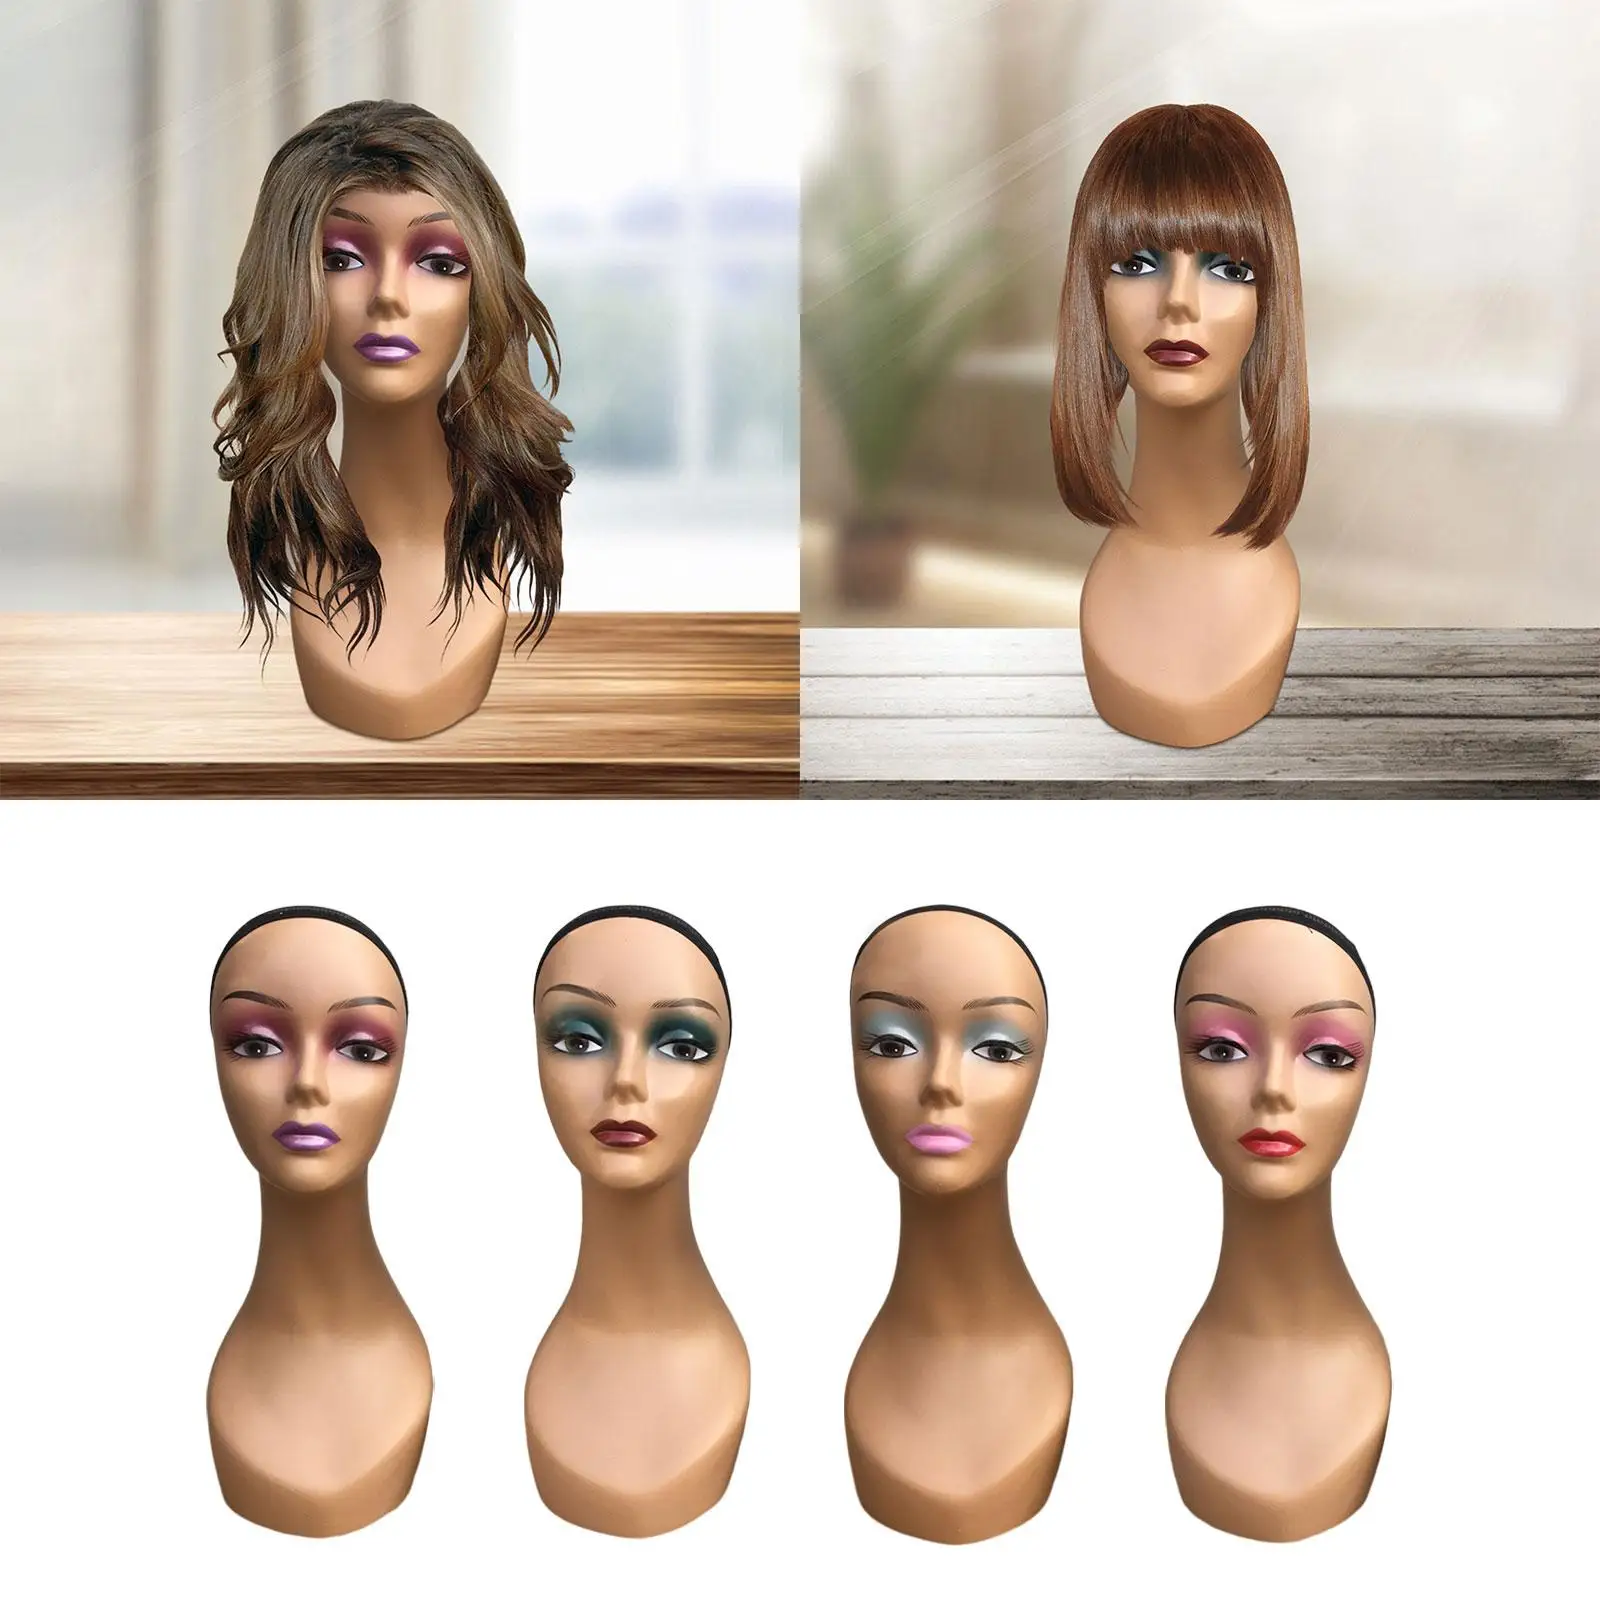 Female Wig Head Mannequin Professional Multifunctional with Makeup Manikin for Wigs Making Styling Necklace Hats Glasses Home